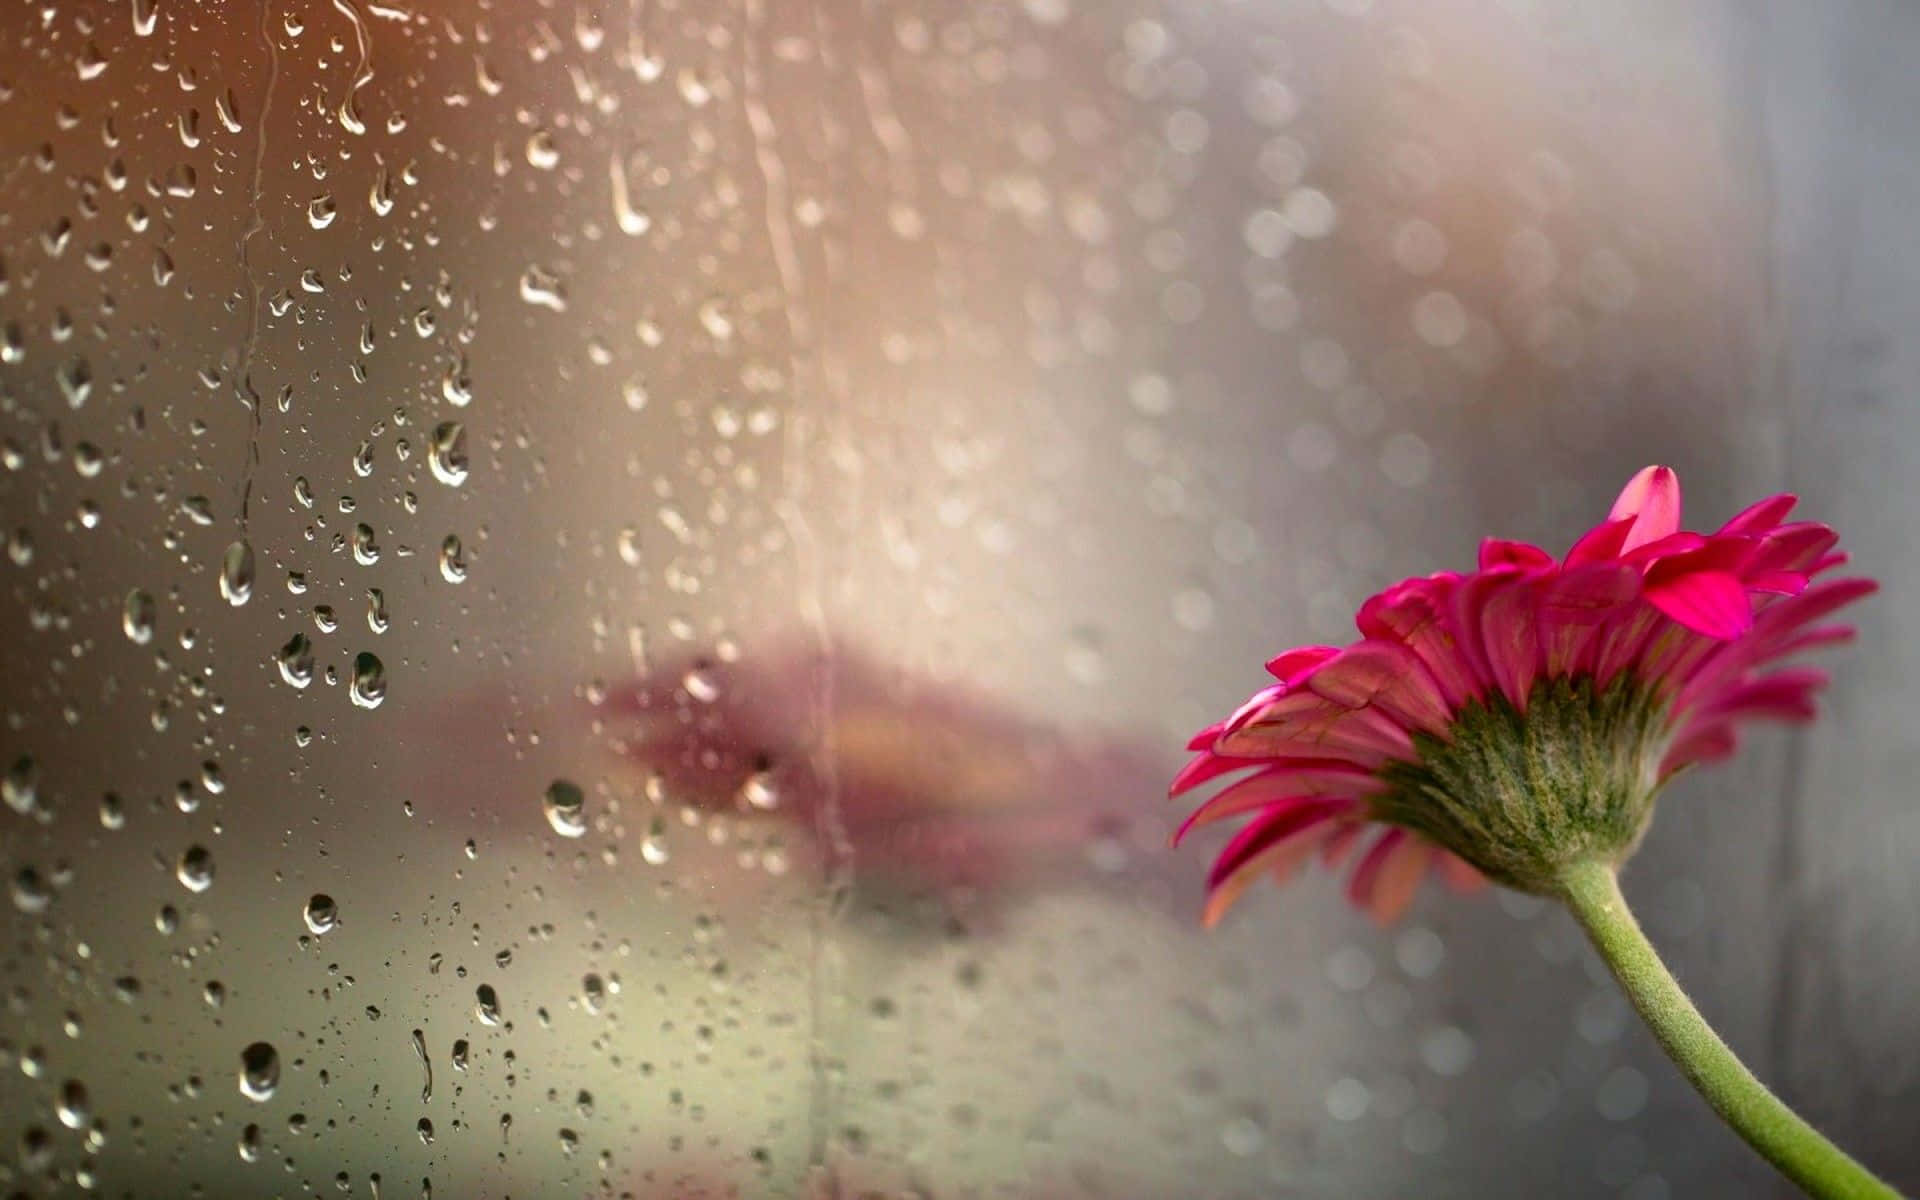 Let the soothing sound of a gentle rainfall relax and calm you